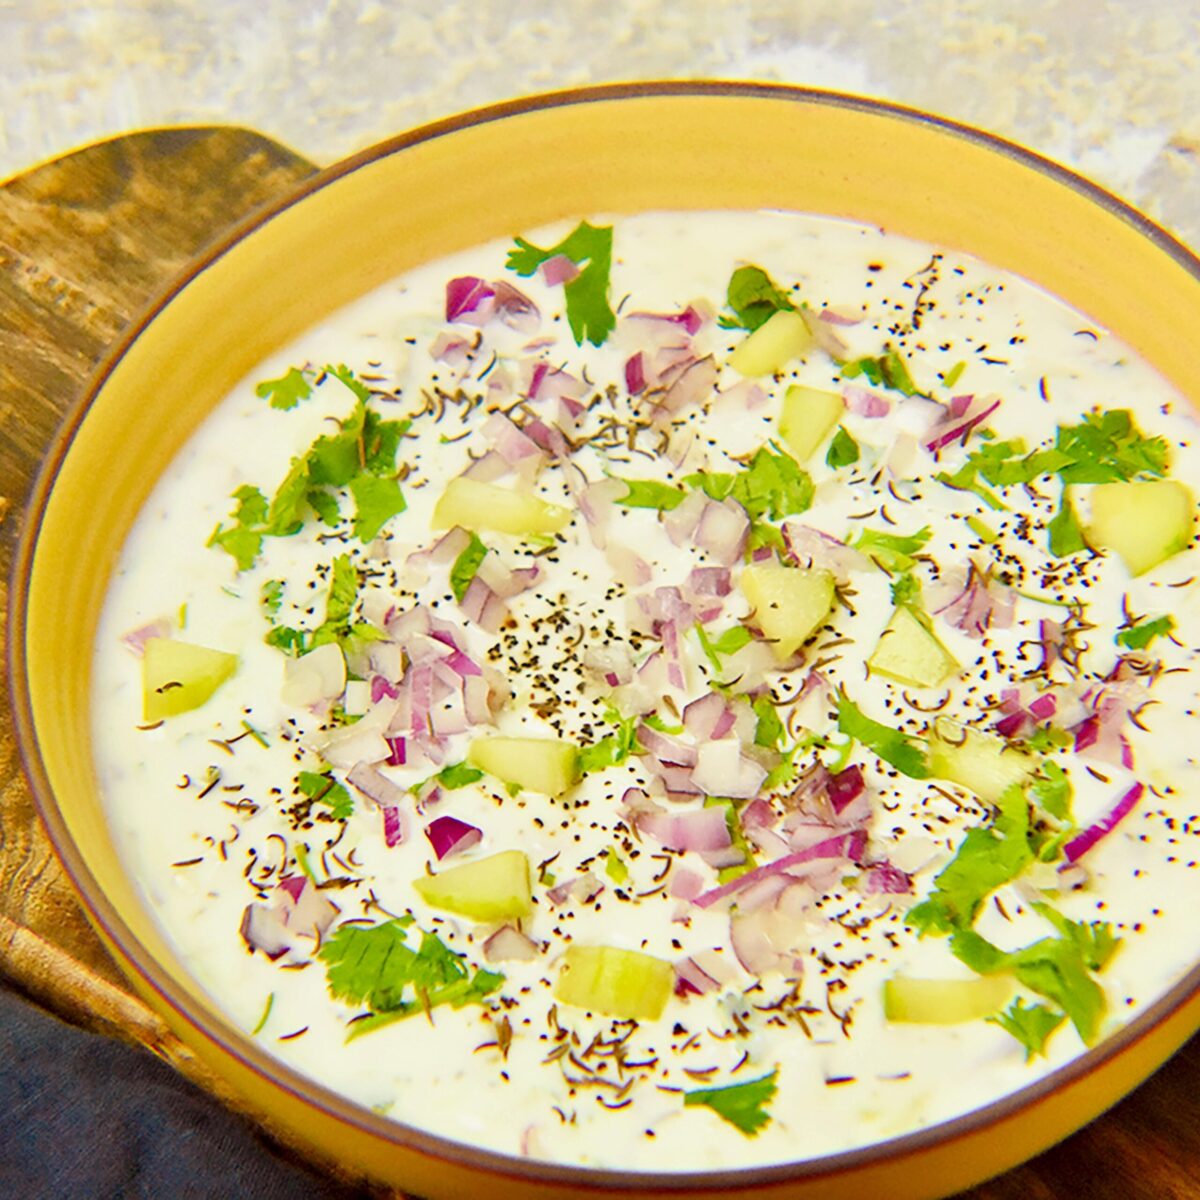 Cucumber raita in a yellow bowl sitting on a wooden board with a dark blue napkin on a light grey kitchen counter.